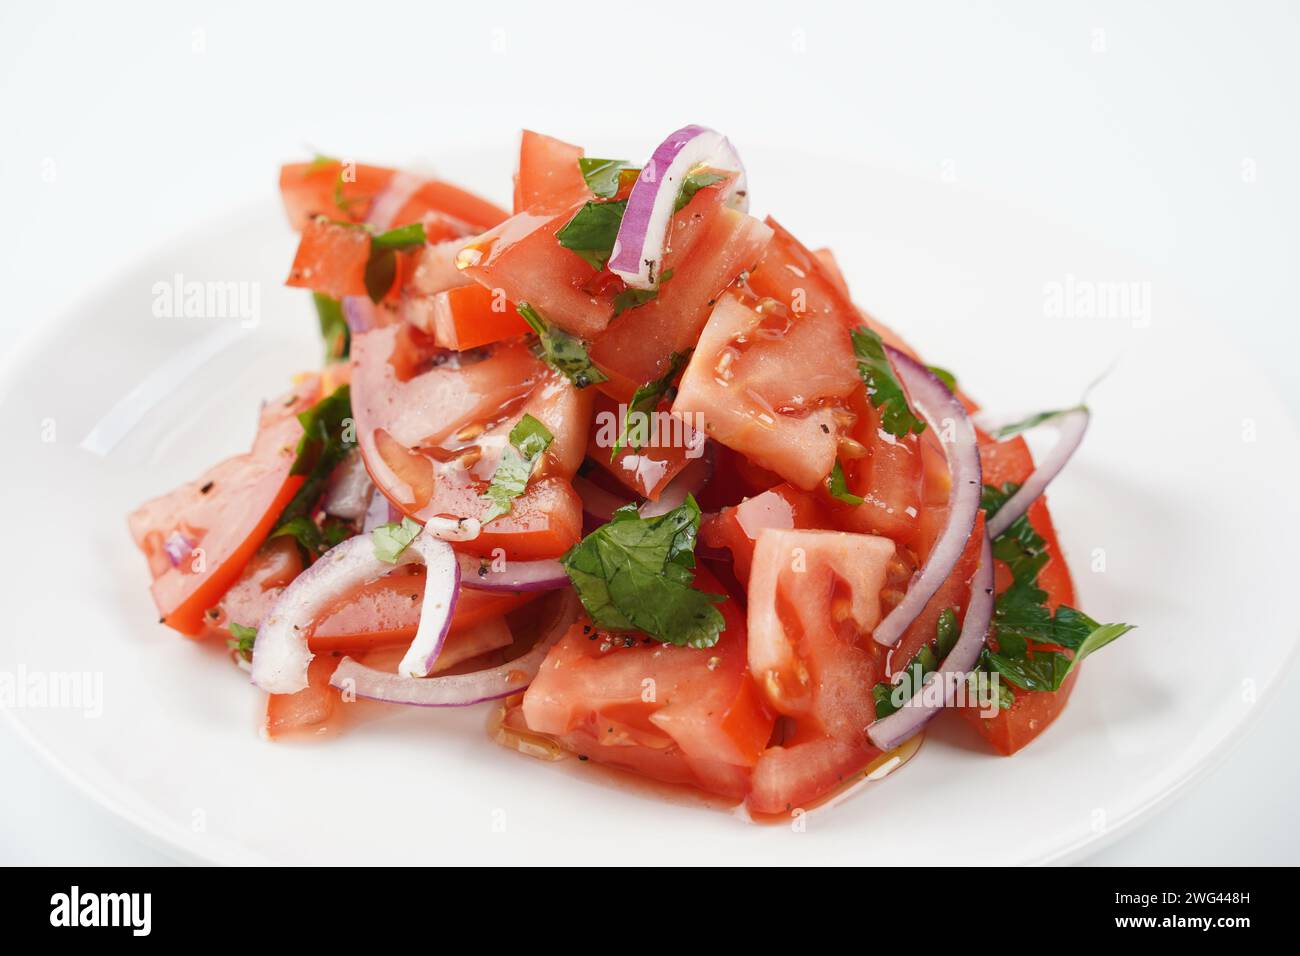 Salad with fresh tomatoes, olive oil, onions, parsley and fennel. Stock Photo